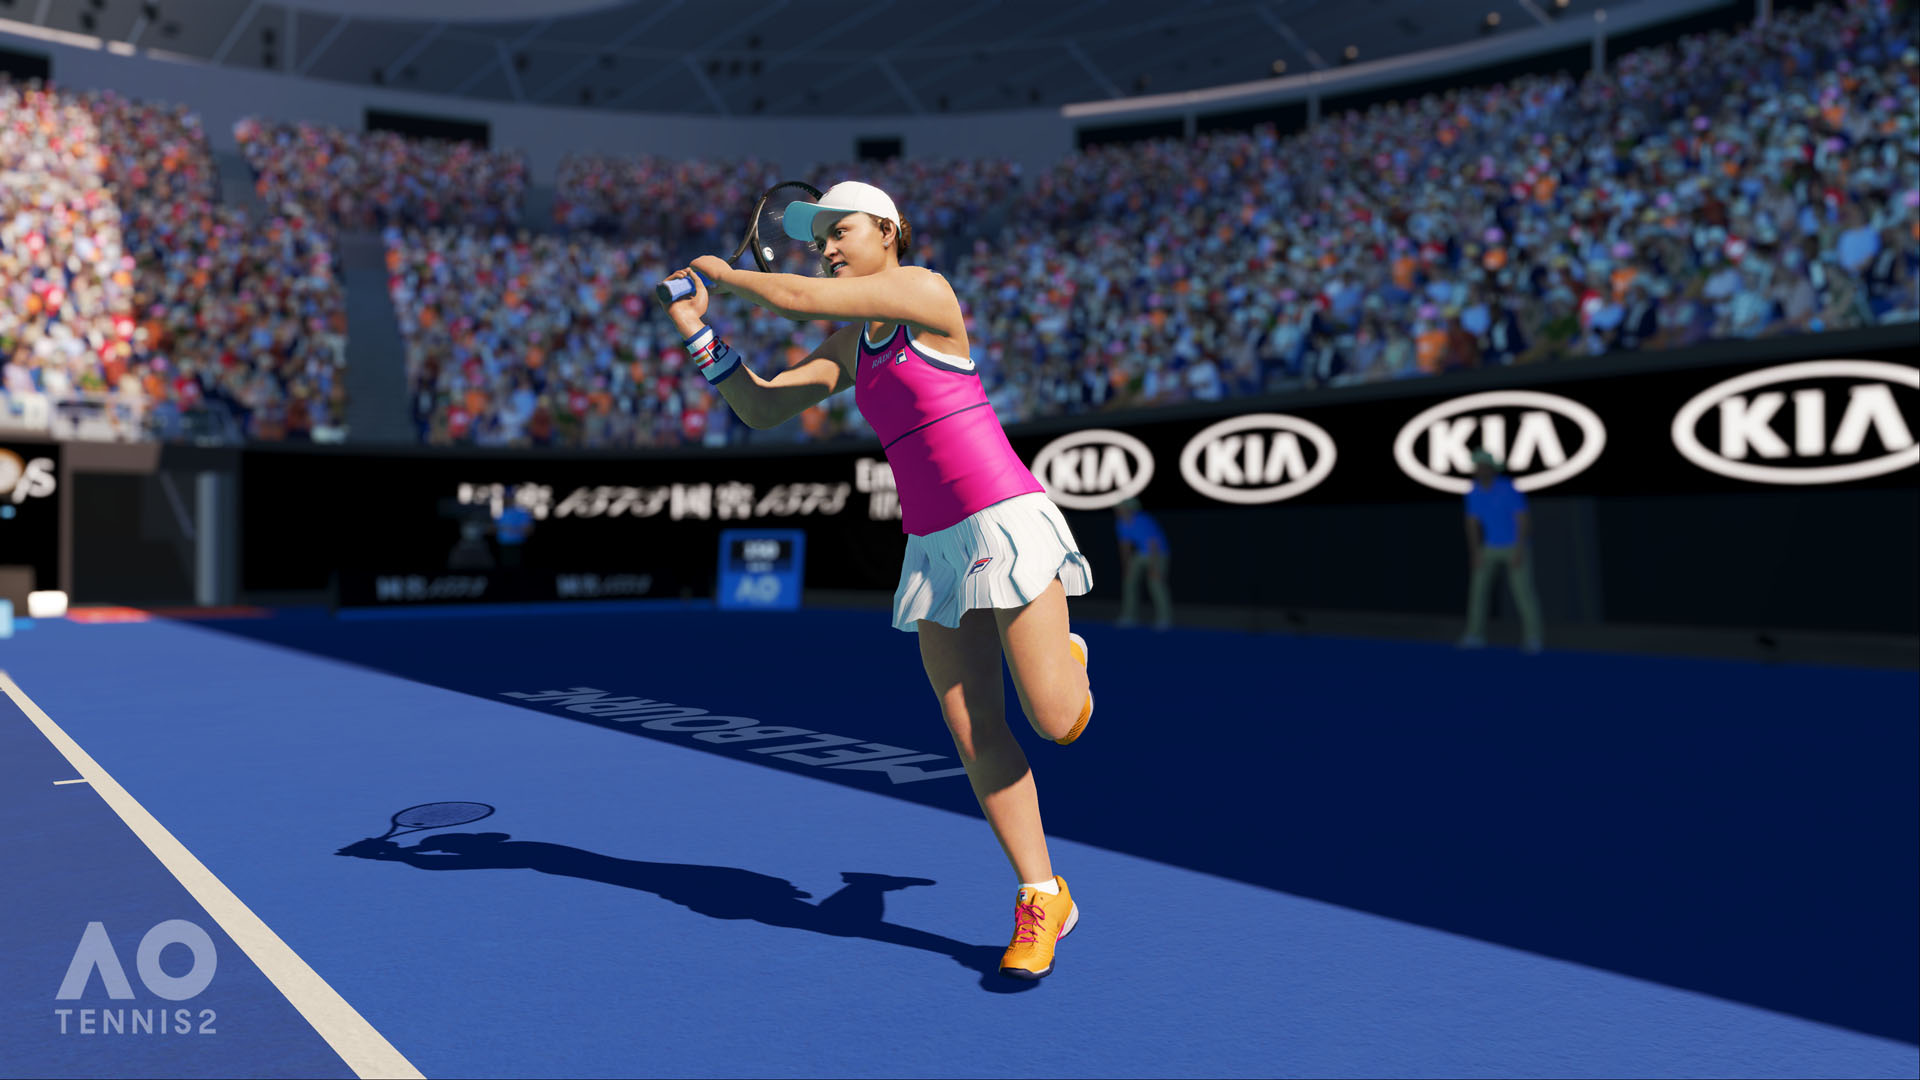 New AO Tennis 2 Update Patch Available On PC